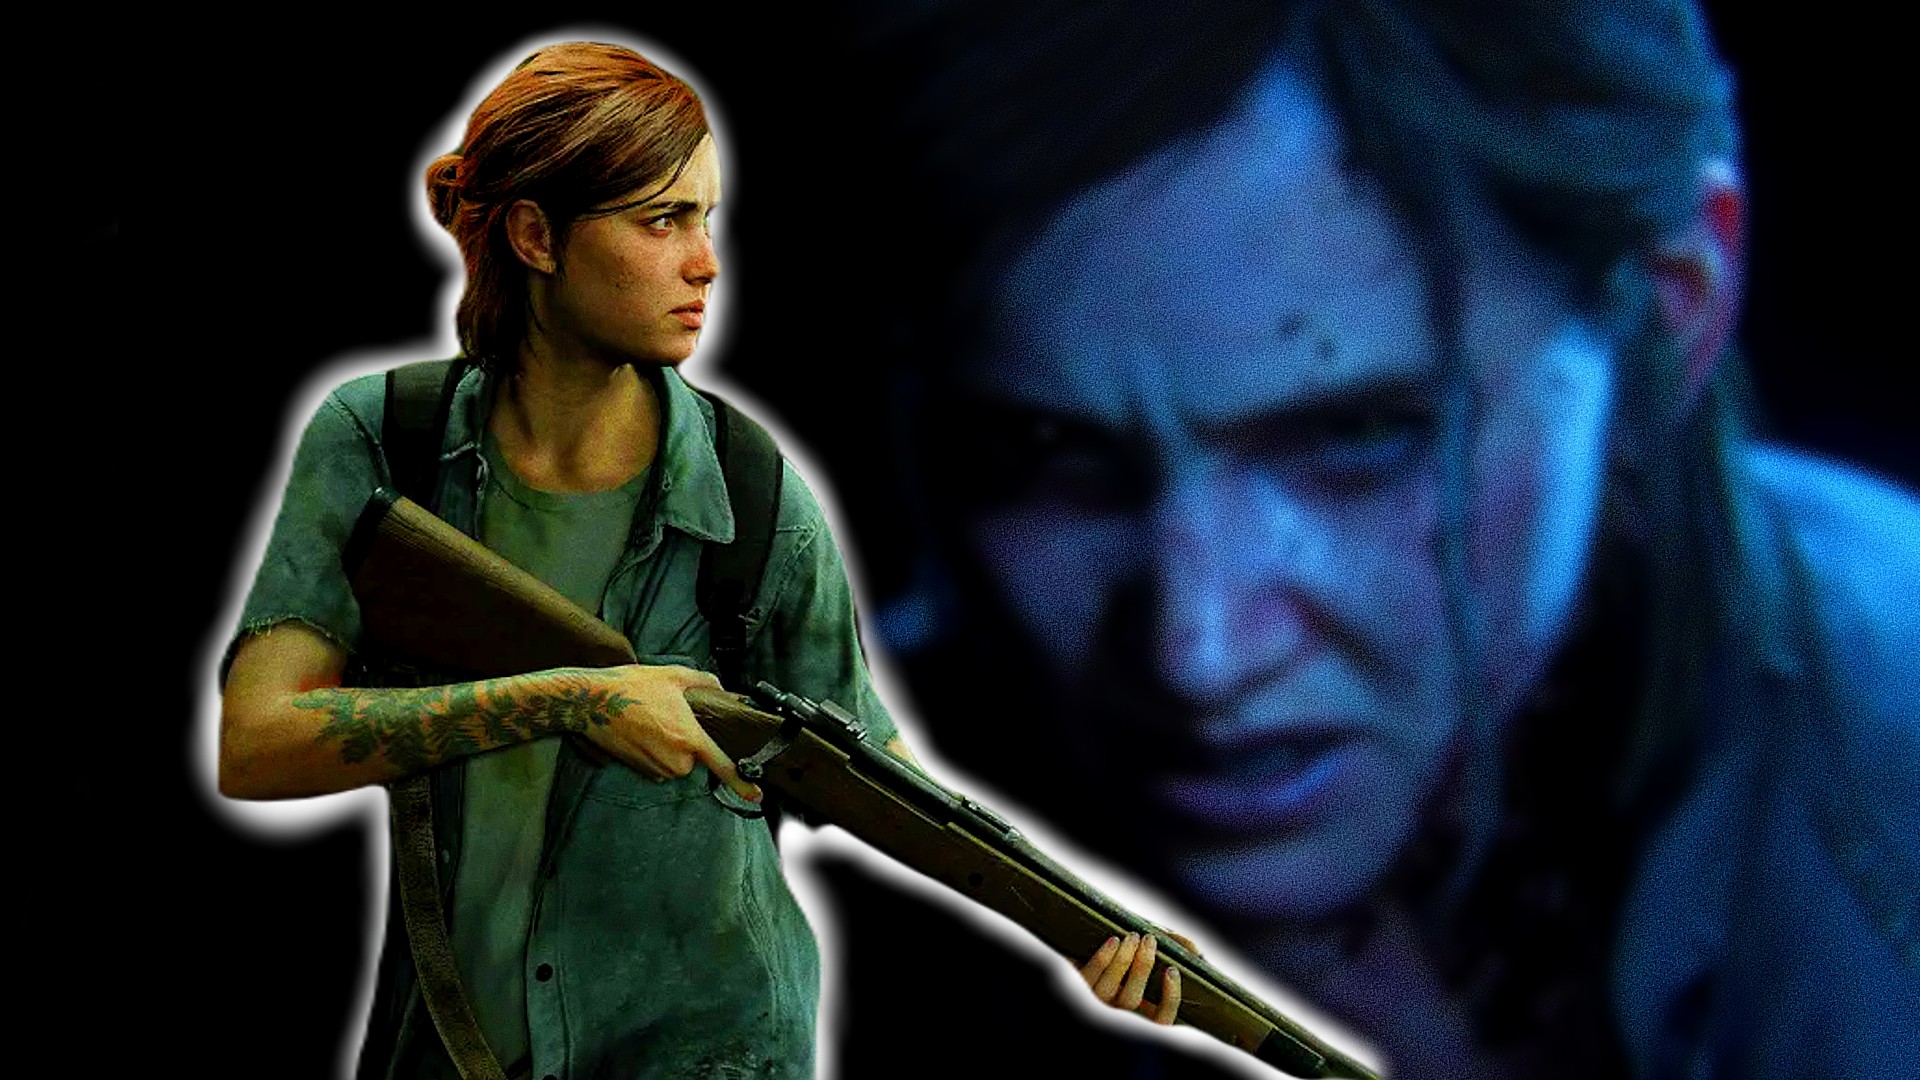 ﻿It looks like we might get The Last of Us Part 2 on PS5 after all